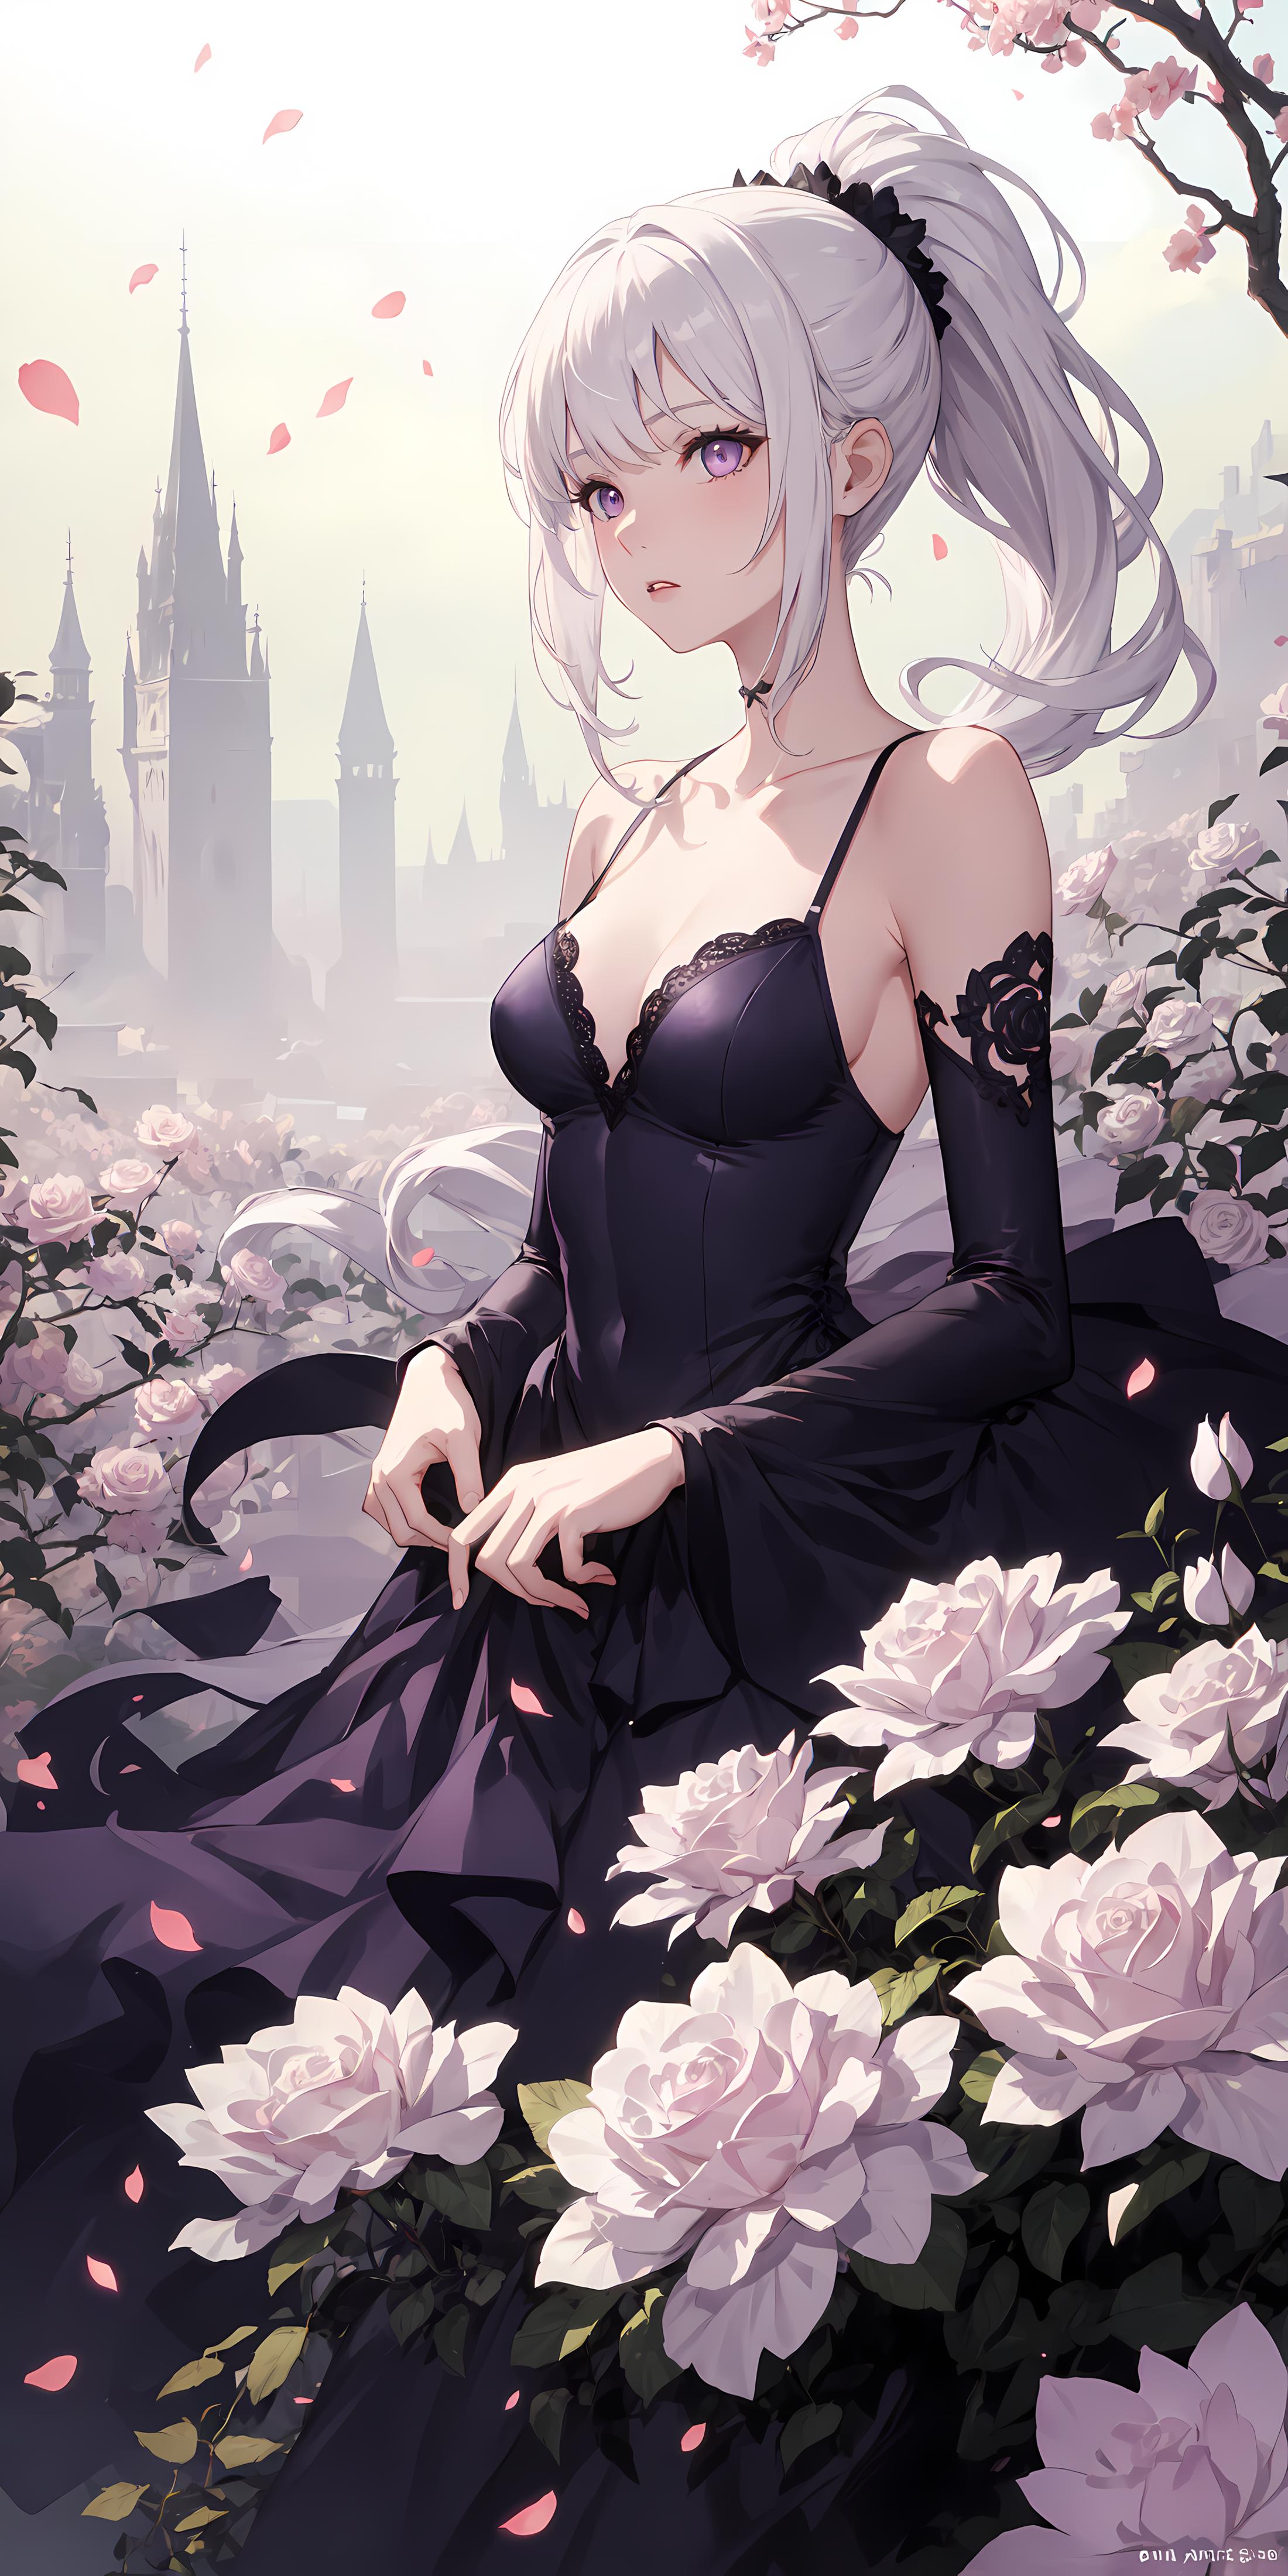 A beautiful woman in a black dress stands among pink flowers.